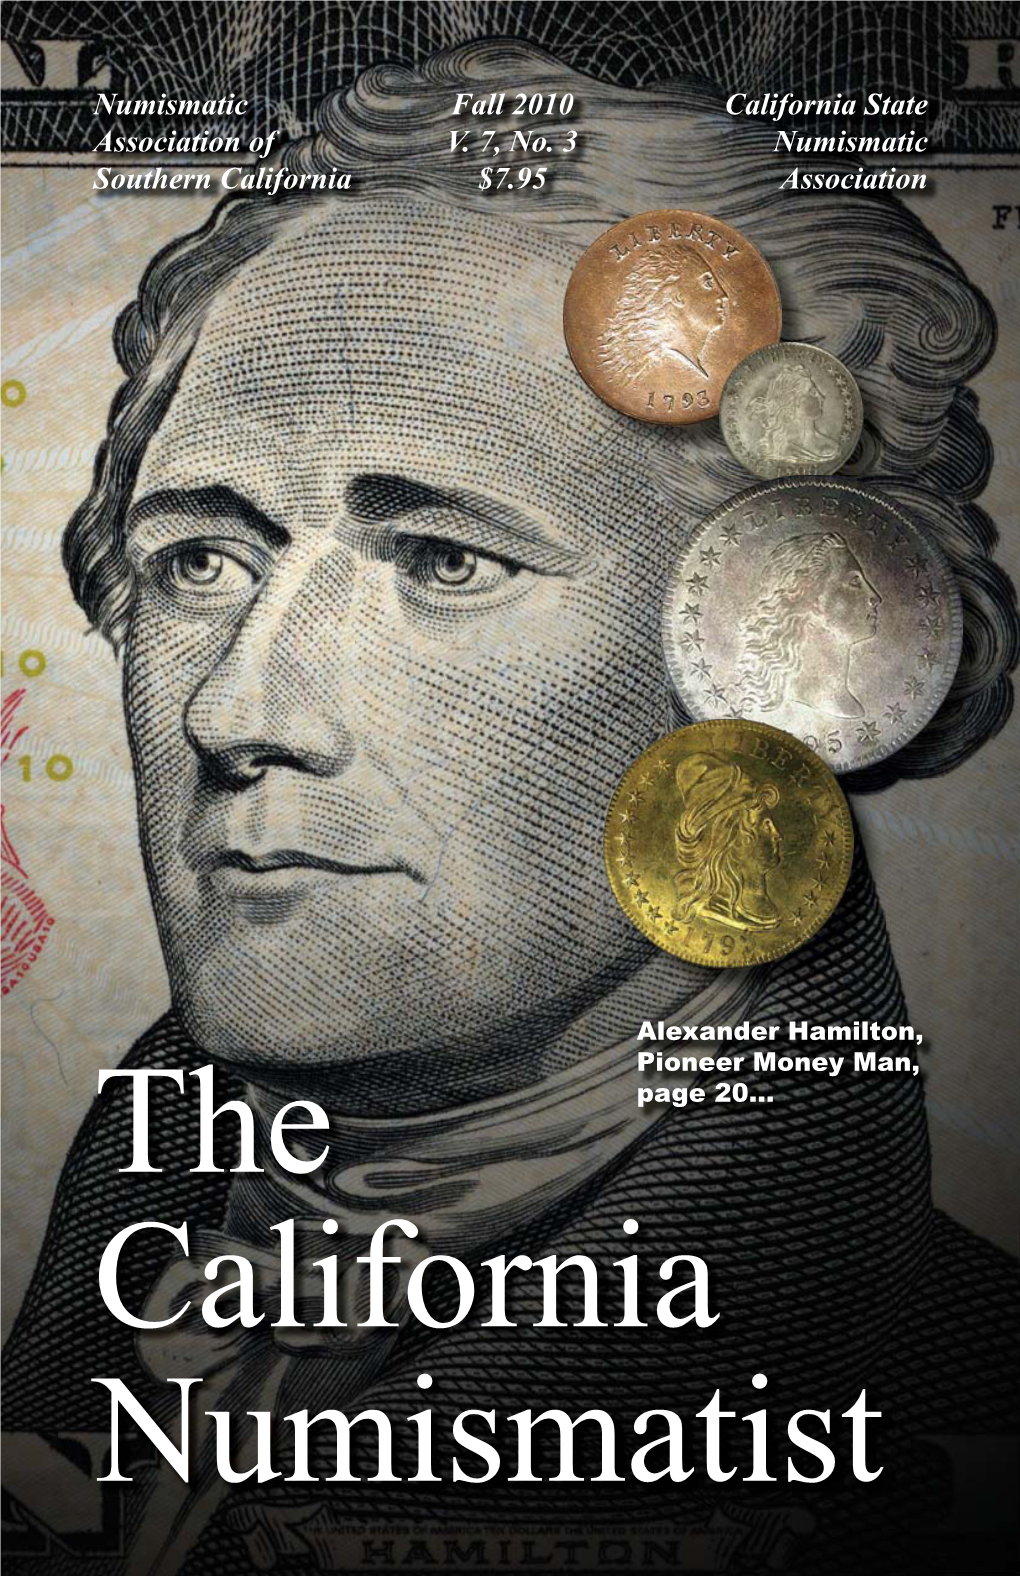 Writing for the California Numismatist